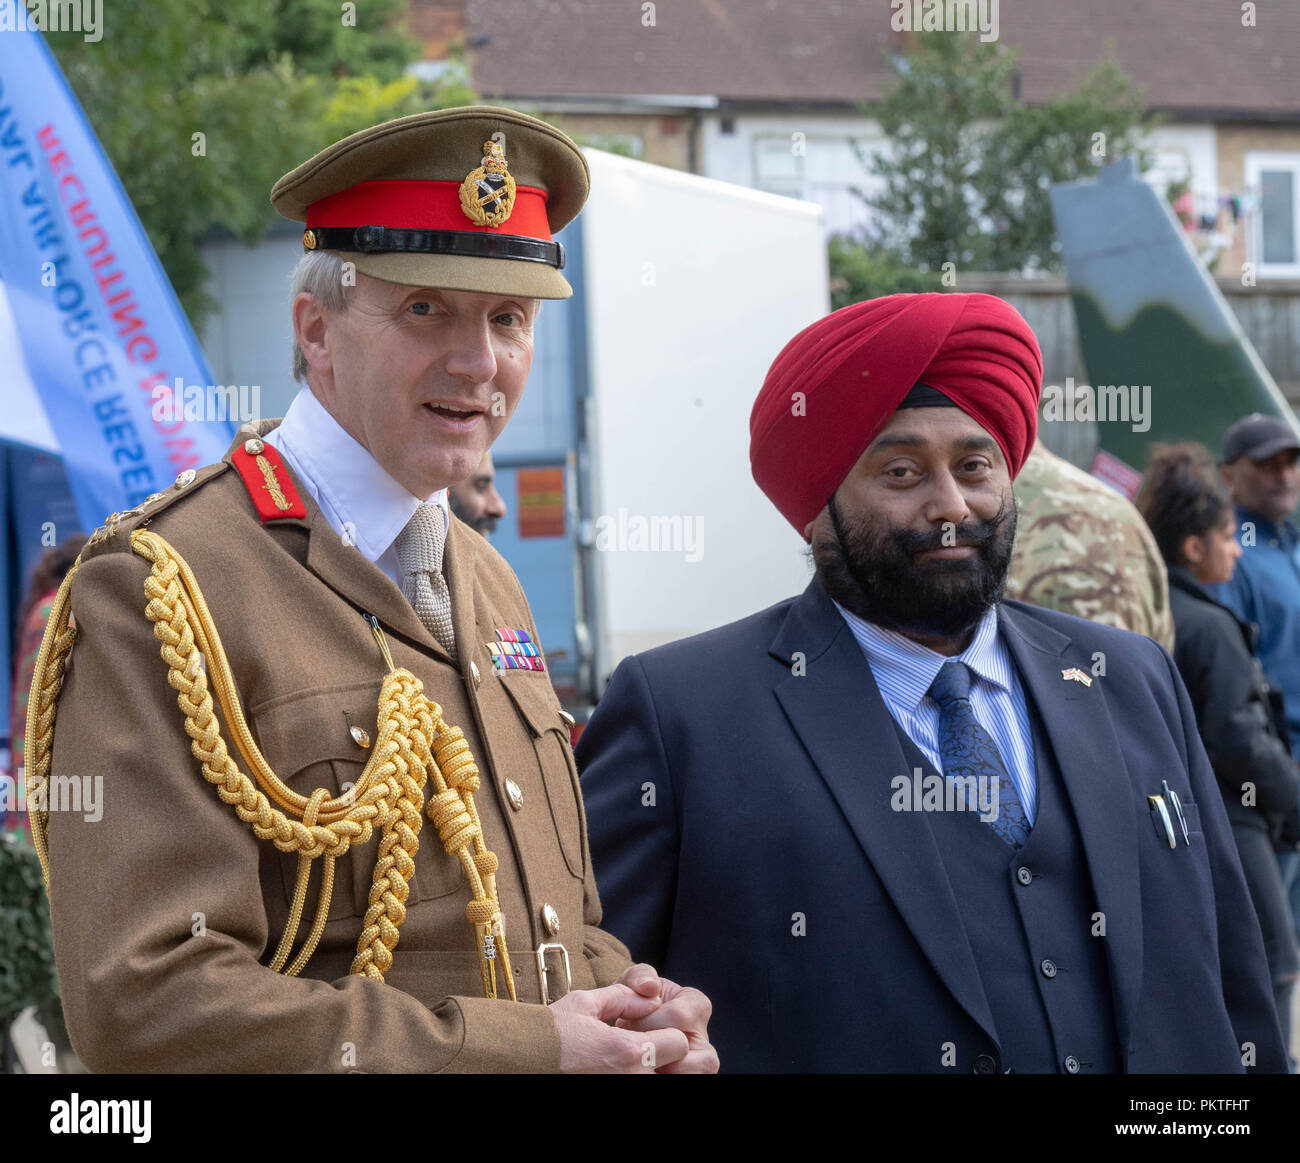 London 15th September 2018 UK Army open day to mark annual Saragarhi Commemorations This celebrates an epic battle where 21 Sikh soldiers took a last stand against 10,000 enemy tribesmen in 1897  Major General Ben Bathurst CBE General officer commanding London District, talks to some local sikhs at the event Credit Ian Davidson/Alamy Live News Stock Photo